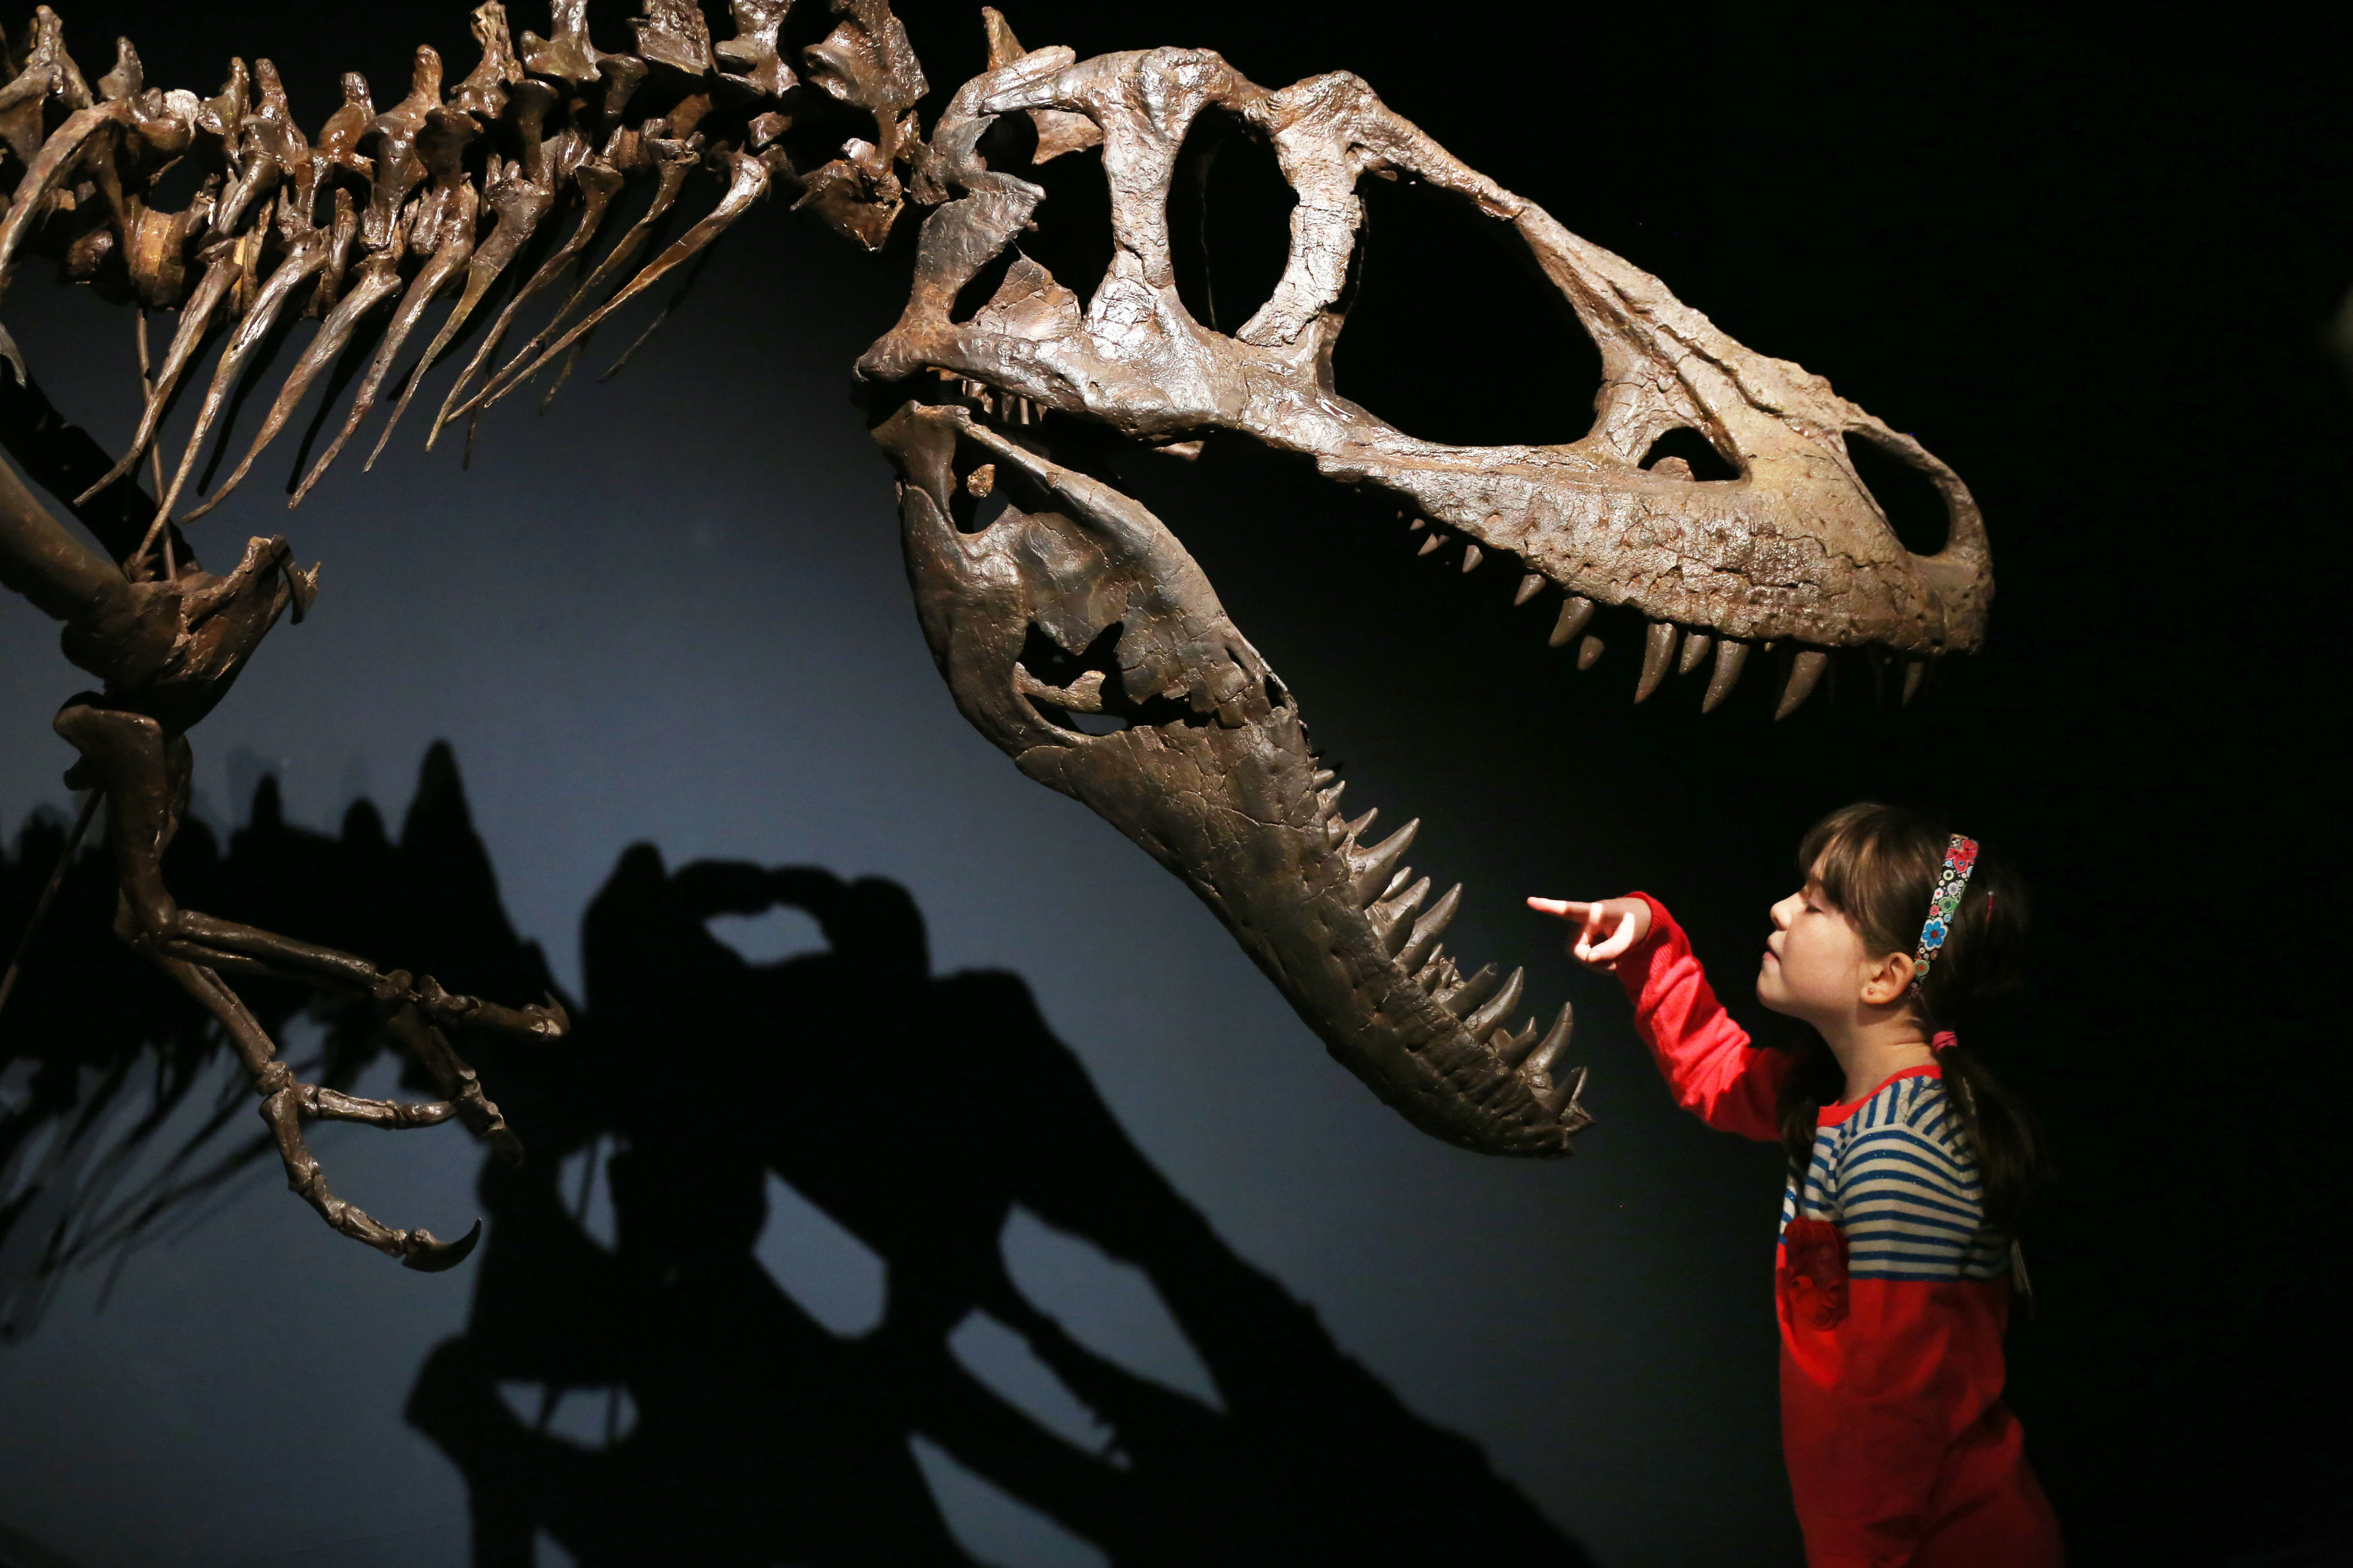 Rosa Connolly gets a sneak preview of the Tyrannosaurs exhibition at the National Museum of Scotland, Edinburgh last week